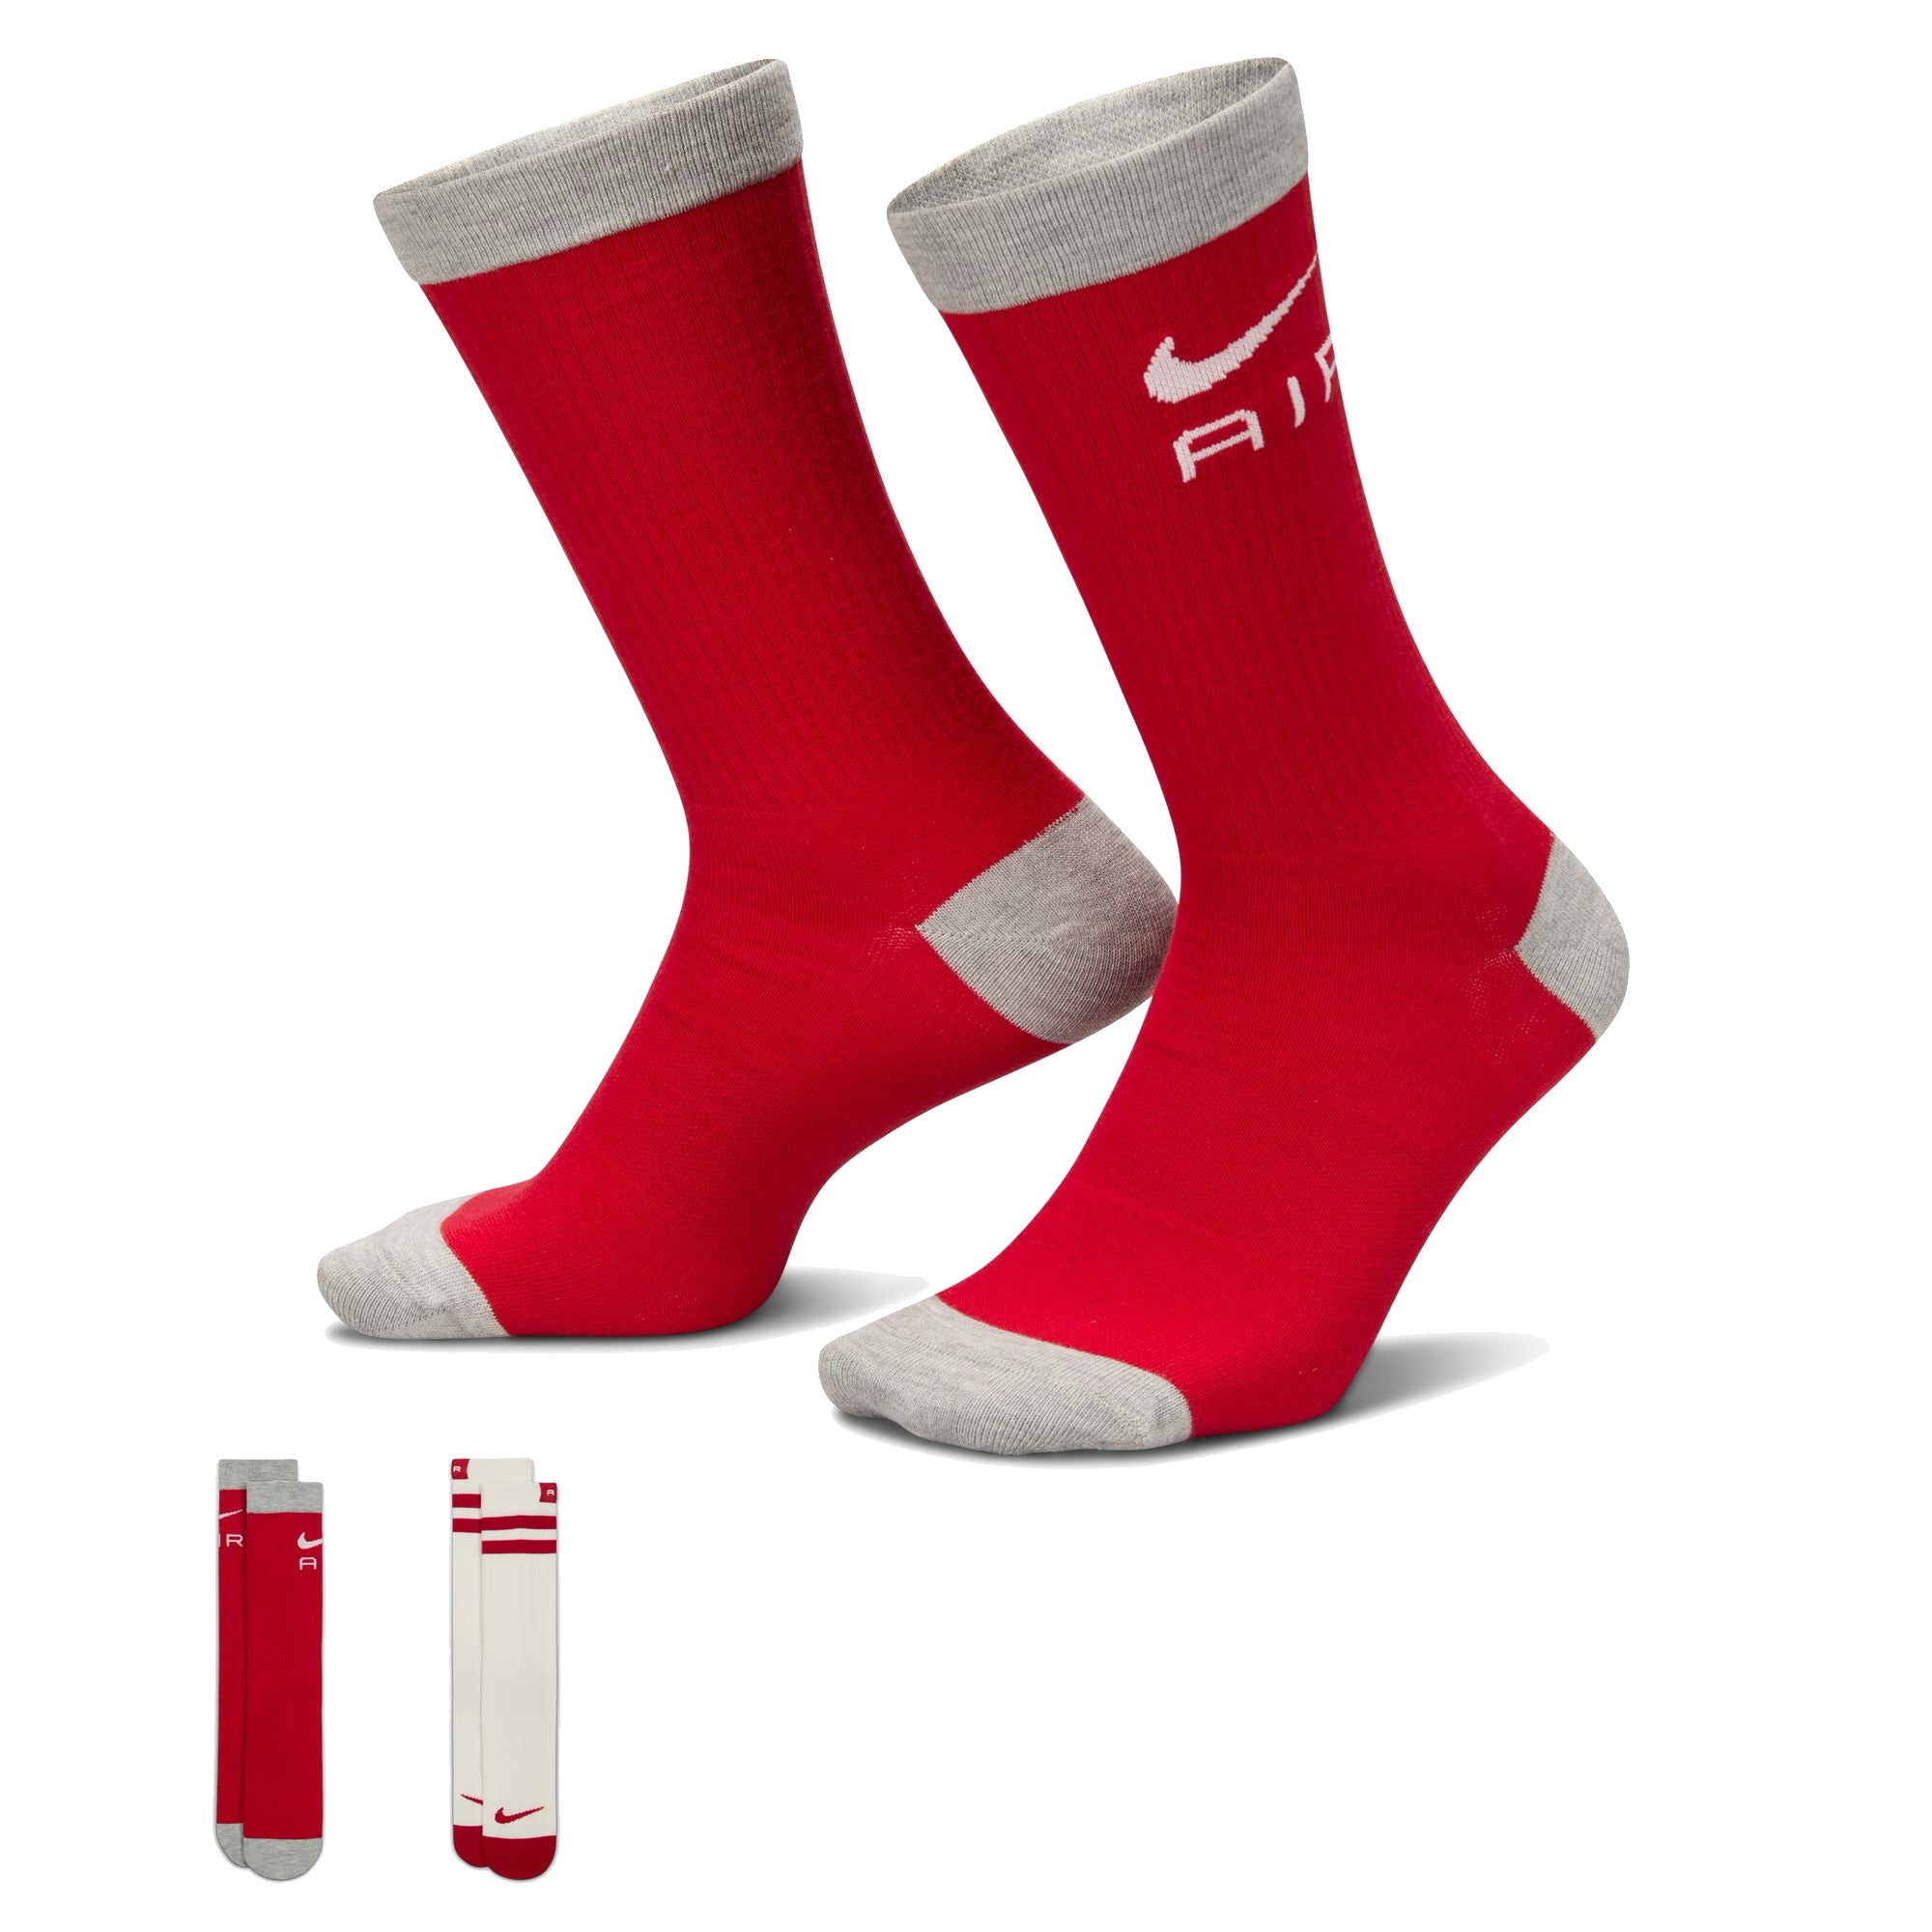 Two pairs of red grey and white red nike socks. Red stripes and a white nike swoosh logo. Free uk shipping over £50